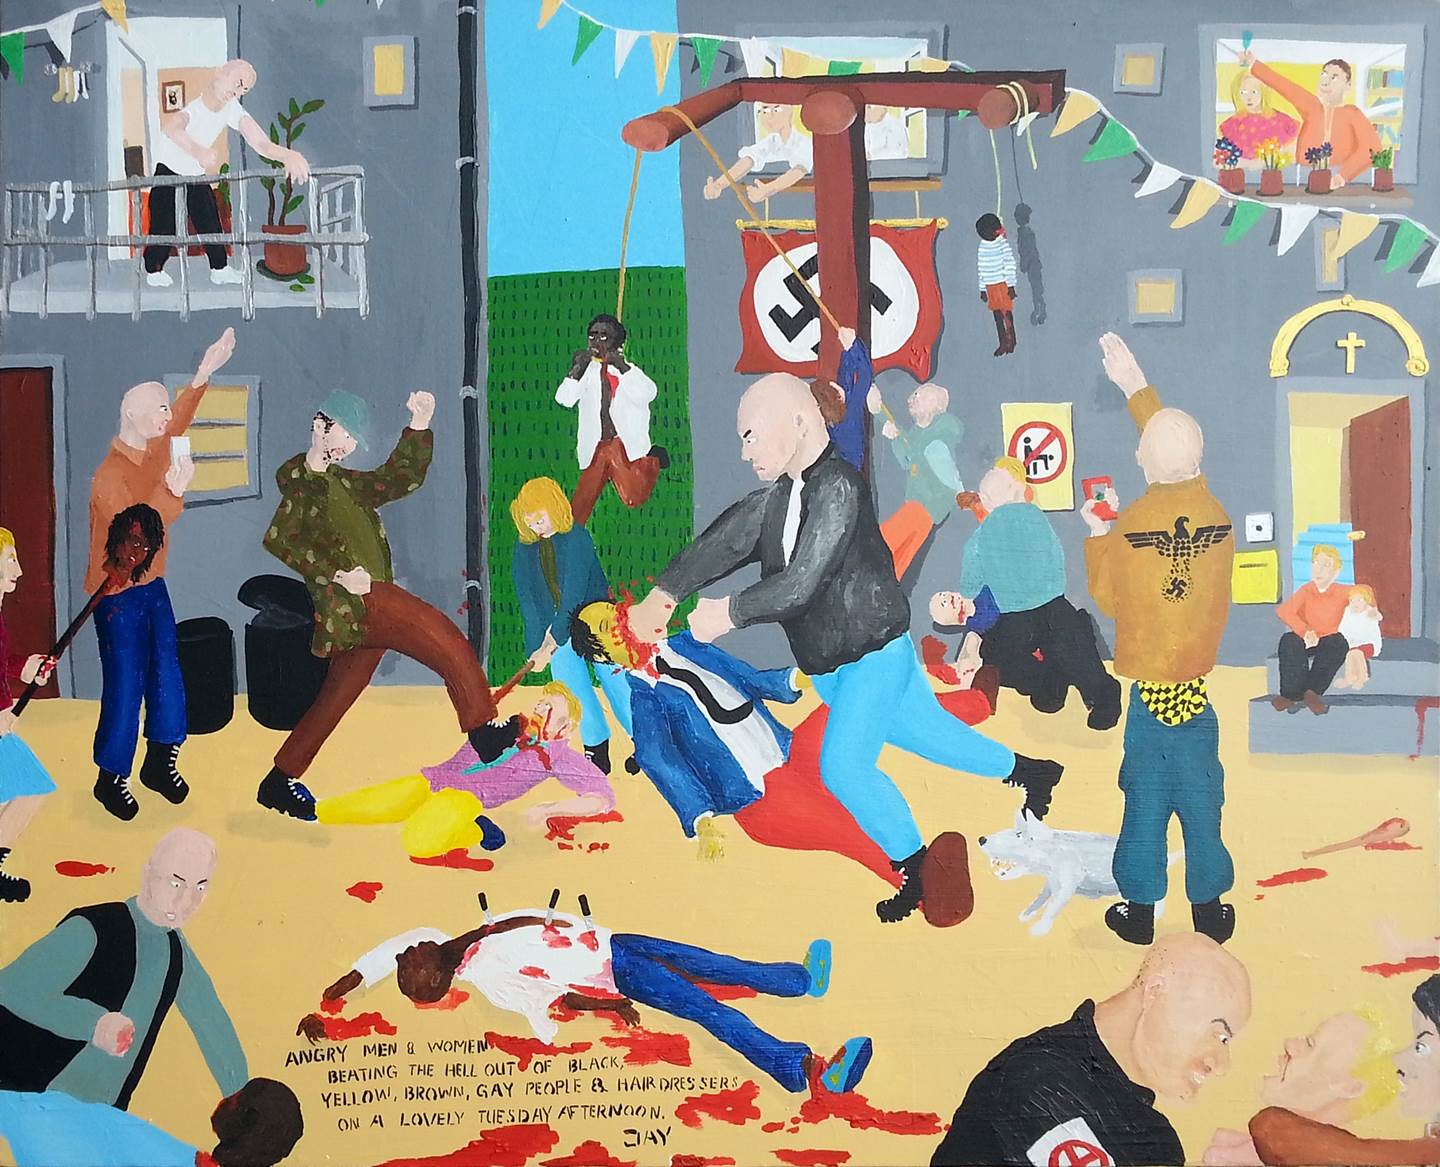 Bad painting number 01: Angry men & women beating the hell out of black, yellow, brown, gay people & hairdressers on a lovely Tuesday afternoon., original Avant-Garde Acrylic Painting by Jay Rechsteiner